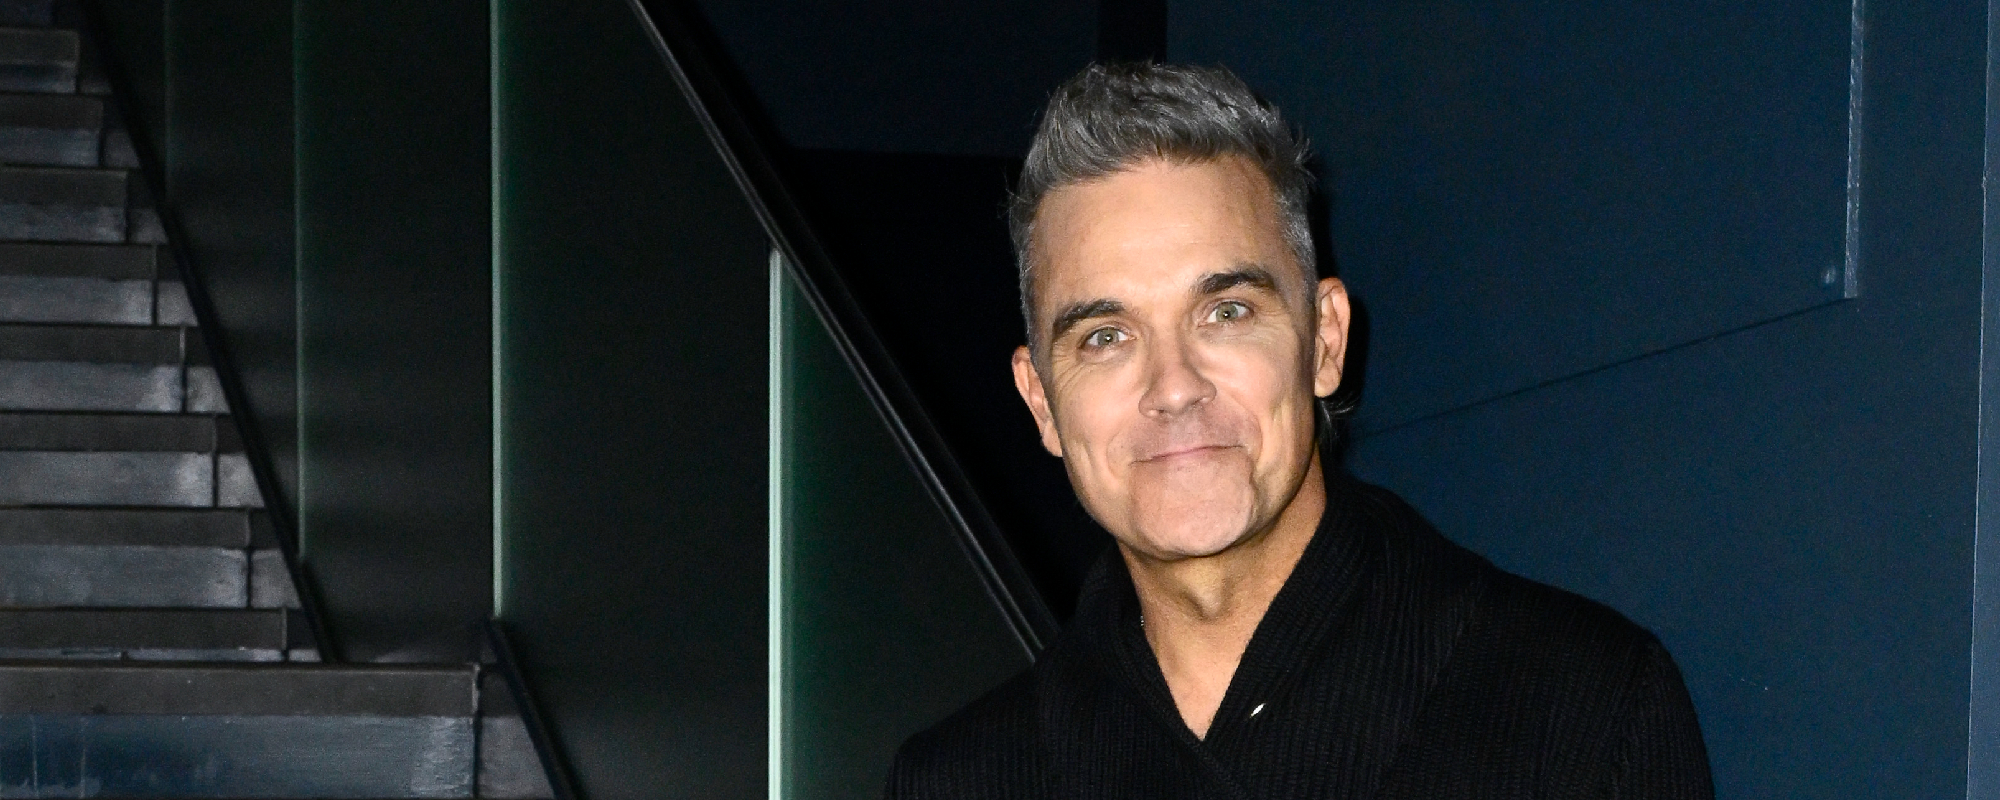 Guy Chambers Reveals How His Head Was About to “Explode” When Recording “Angels” With Robbie Williams